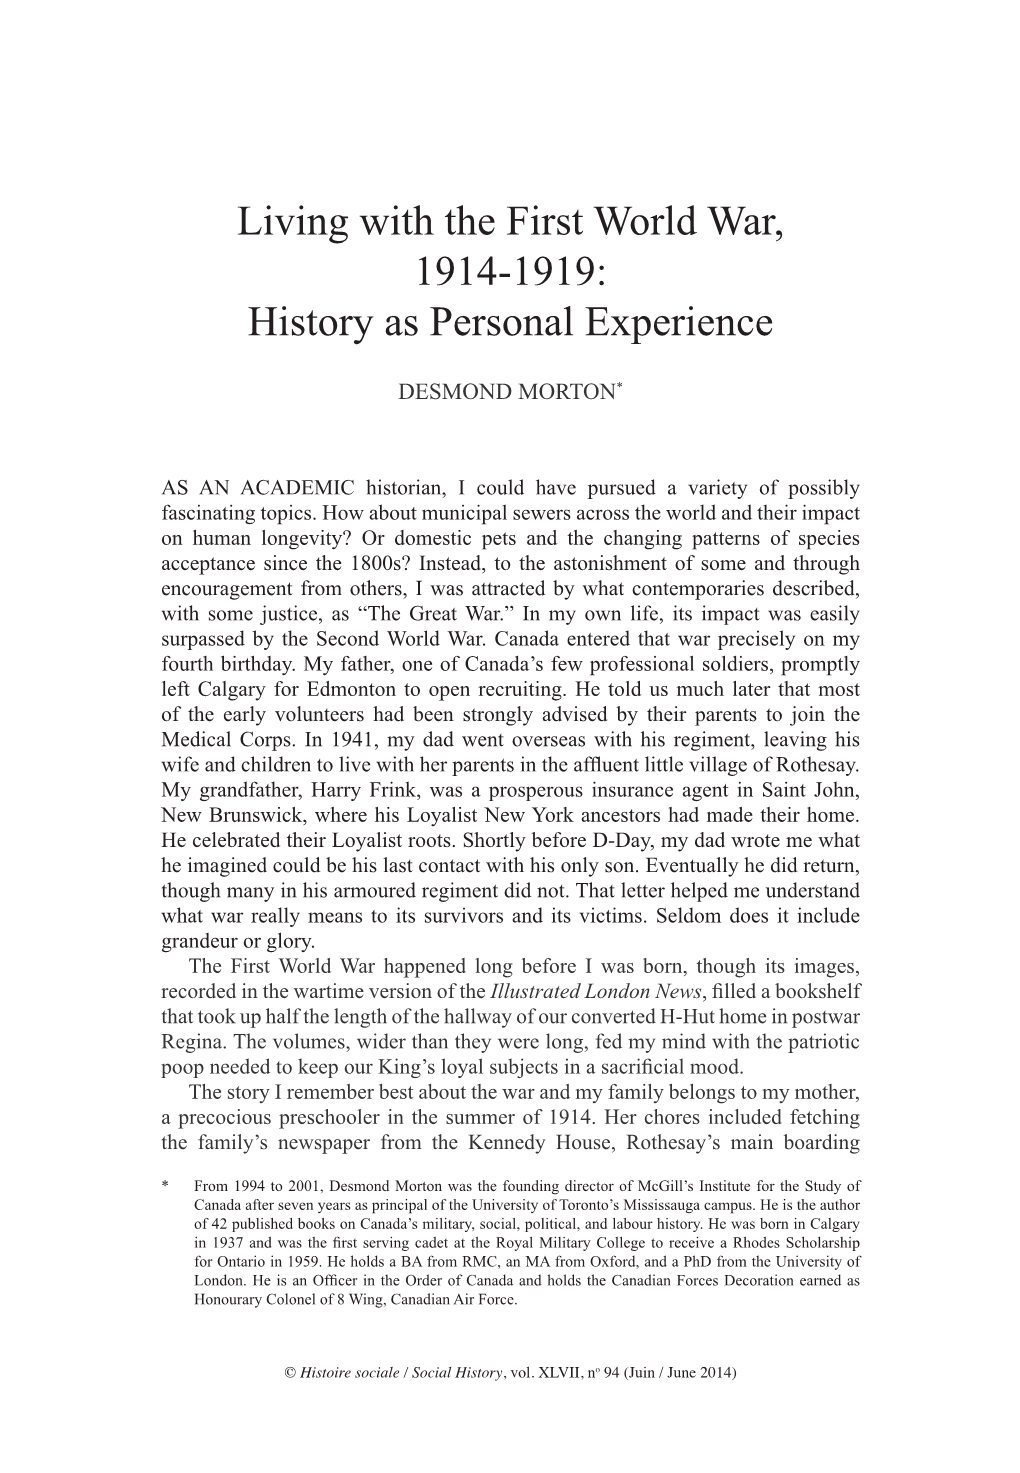 Living with the First World War, 1914-1919: History As Personal Experience